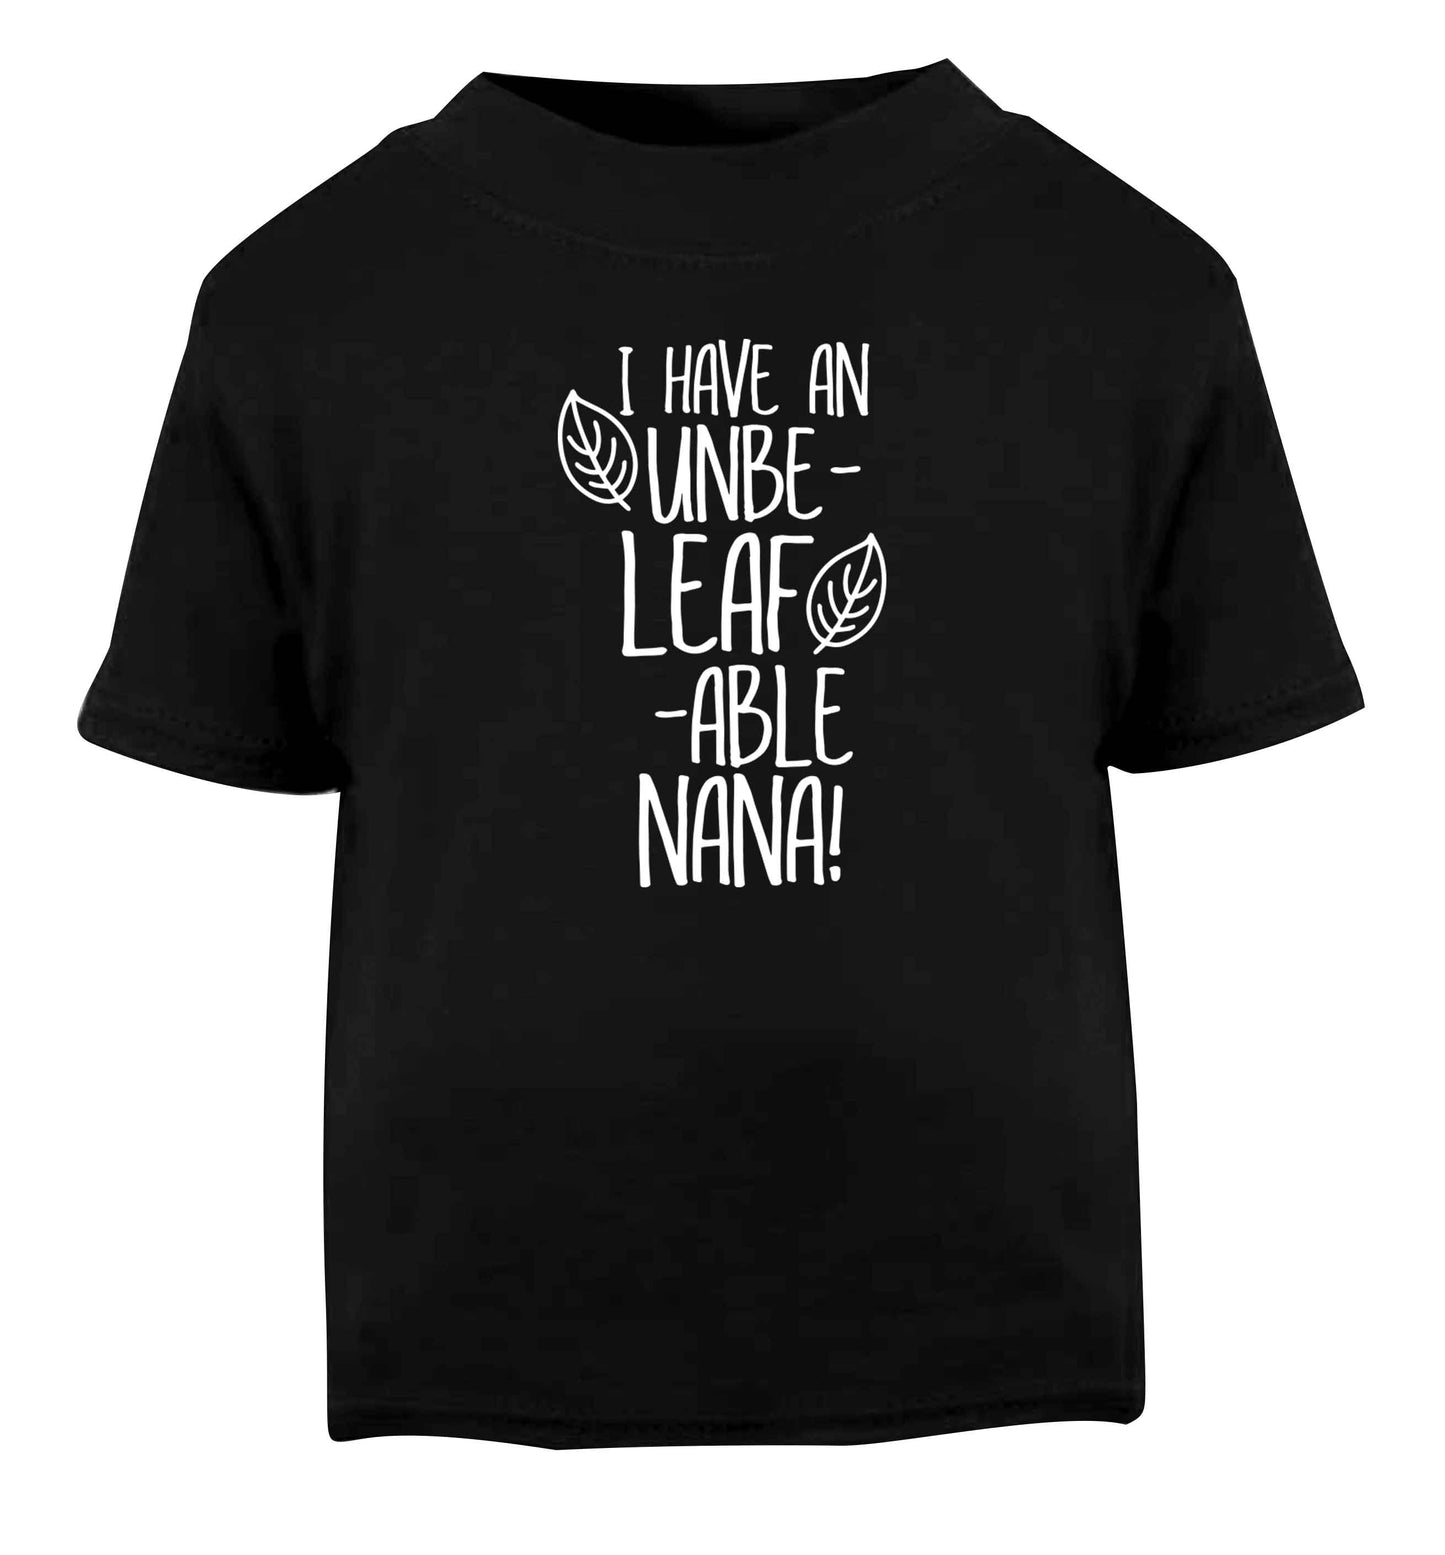 I have an unbe-leaf-able nana Black Baby Toddler Tshirt 2 years